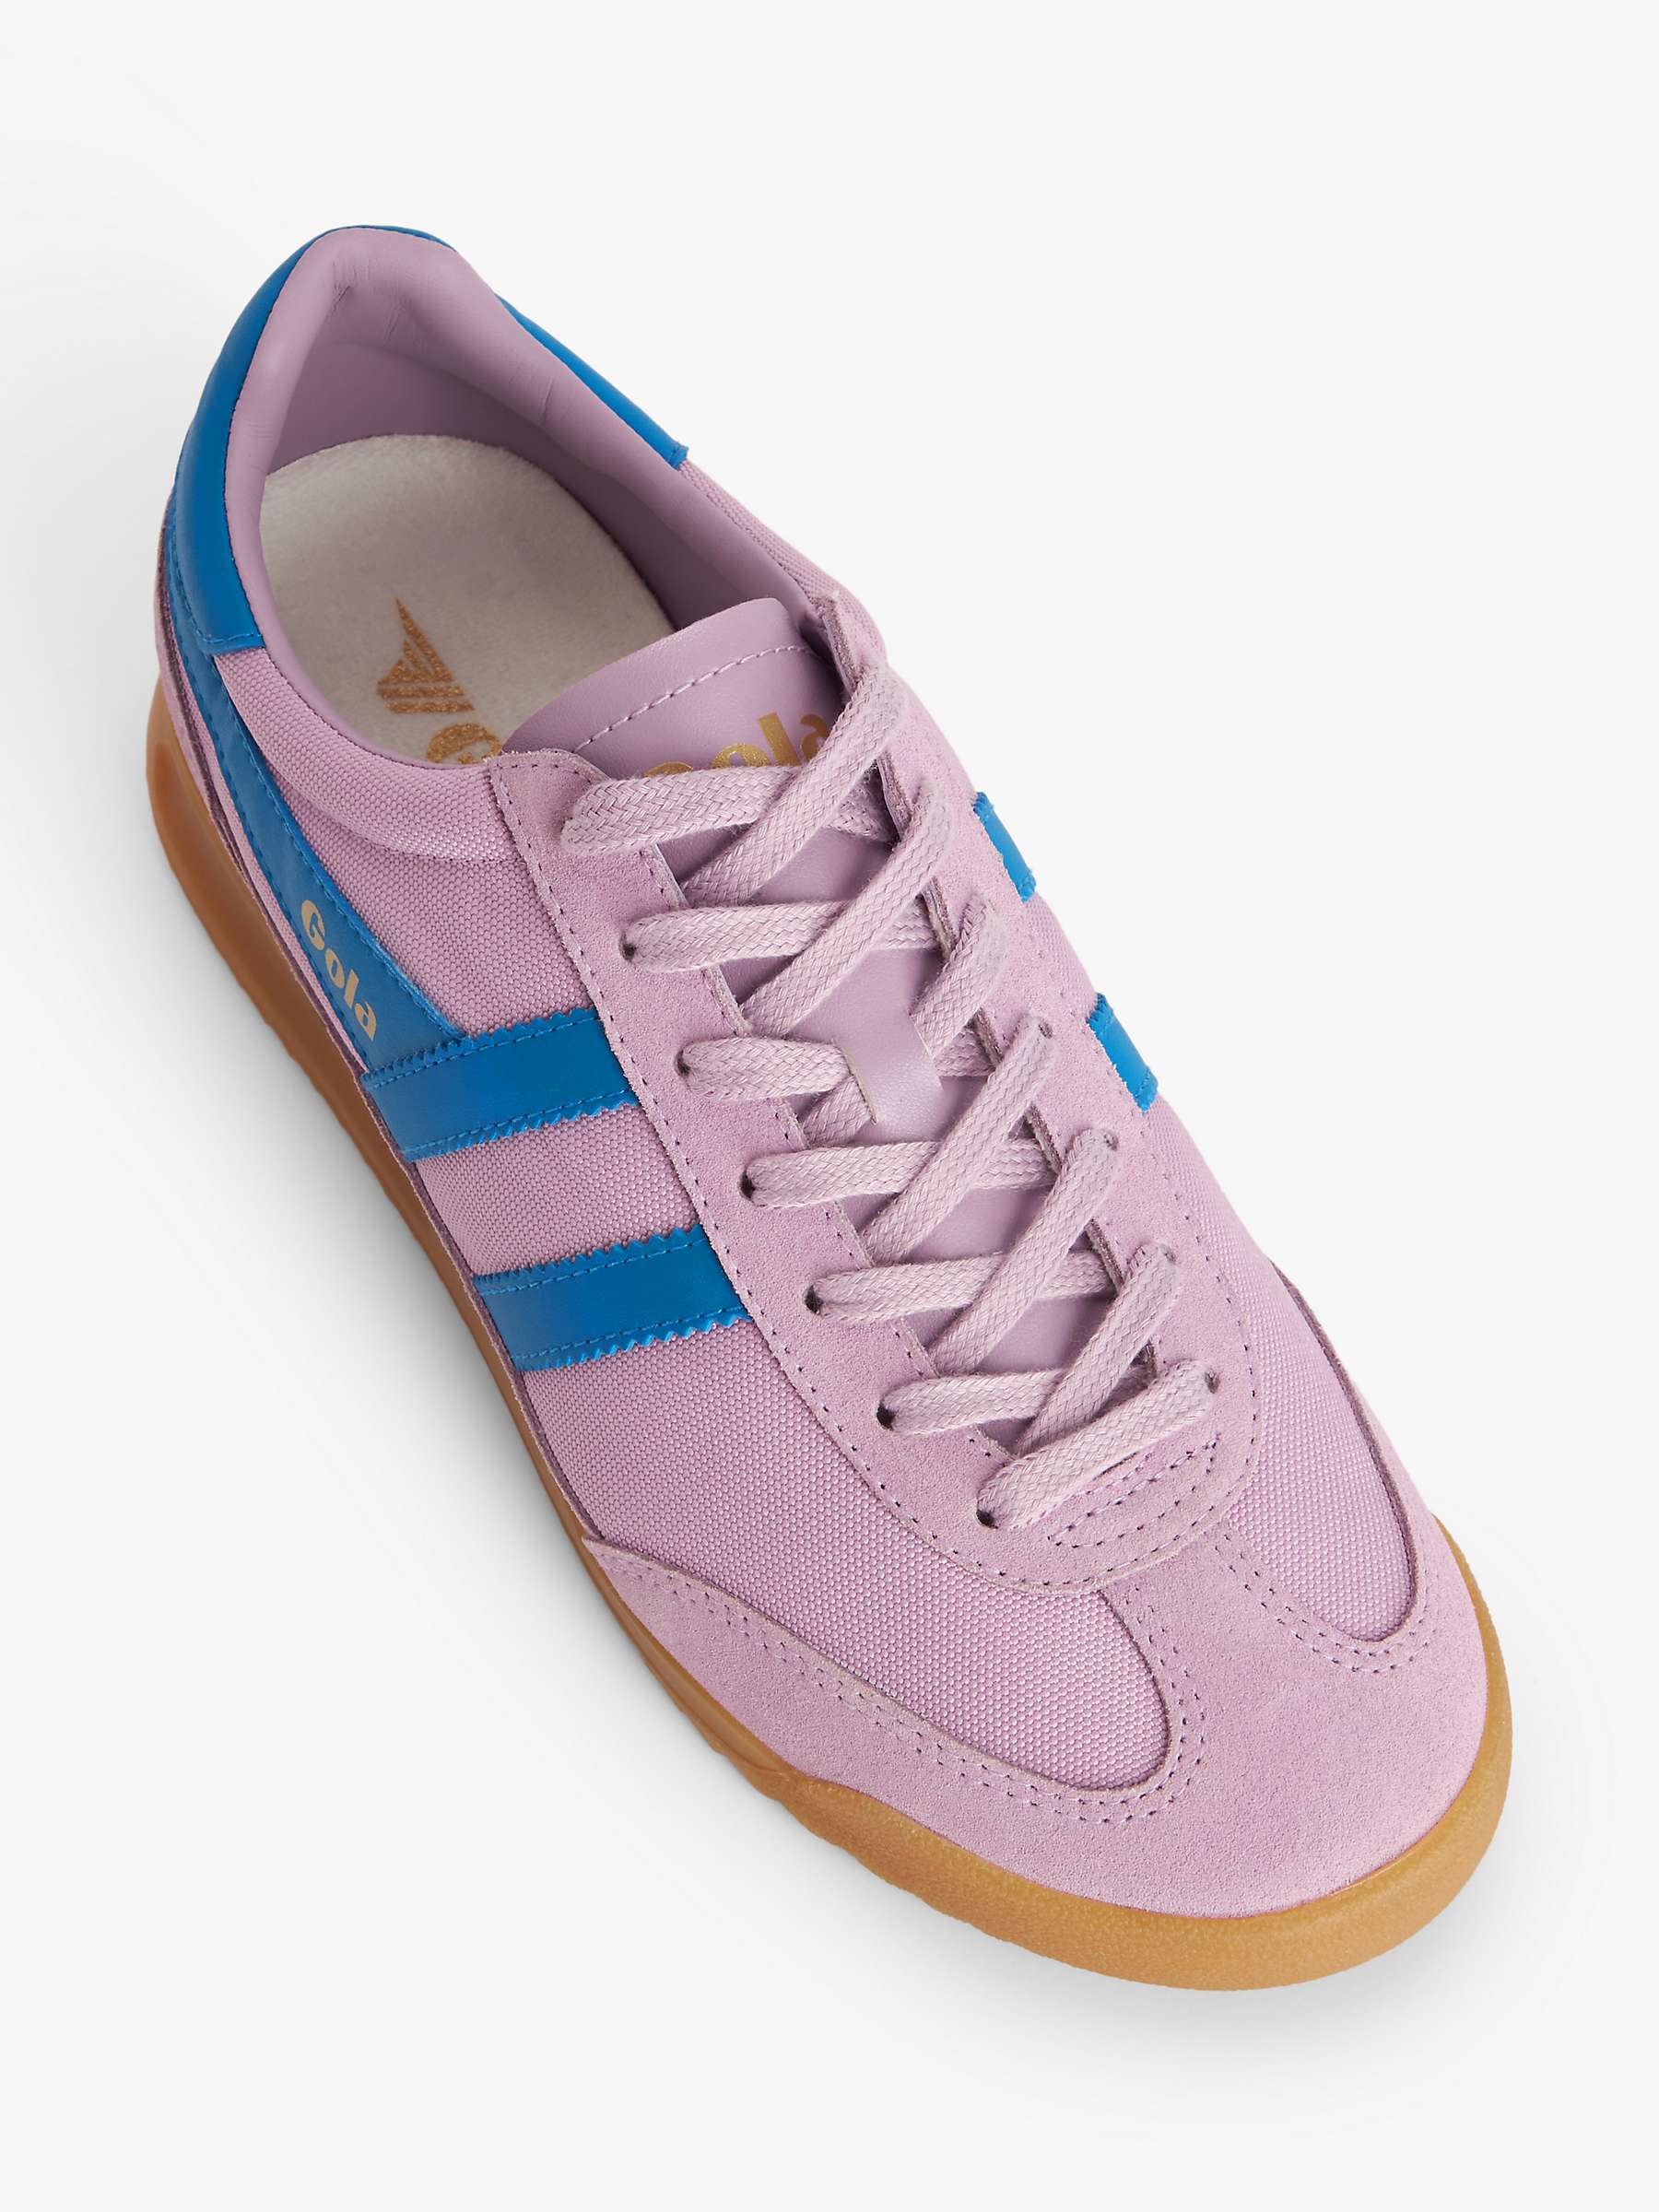 Buy Gola Tornado Trainers, Lilac Online at johnlewis.com